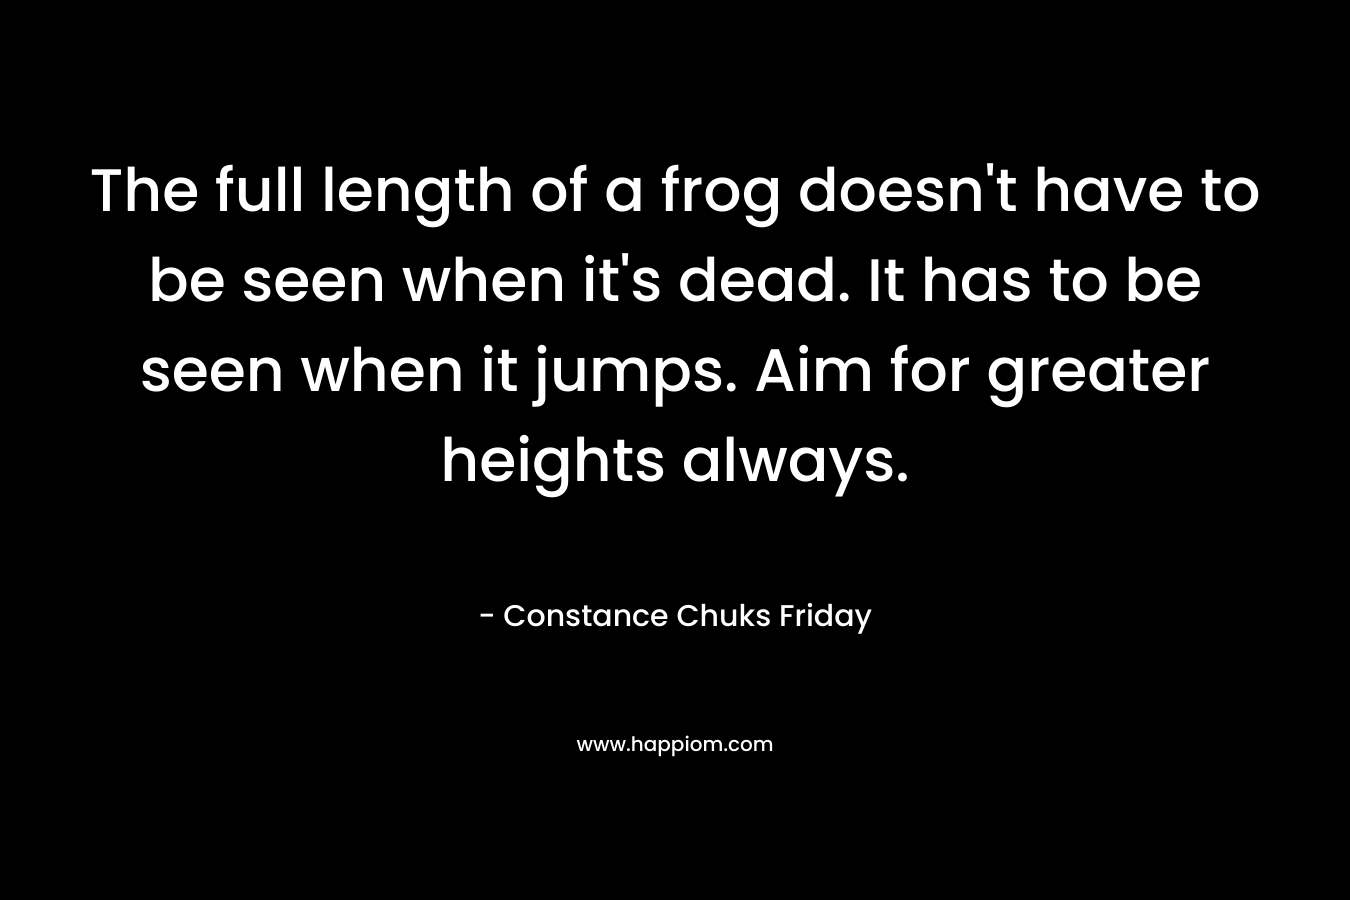 The full length of a frog doesn't have to be seen when it's dead. It has to be seen when it jumps. Aim for greater heights always.